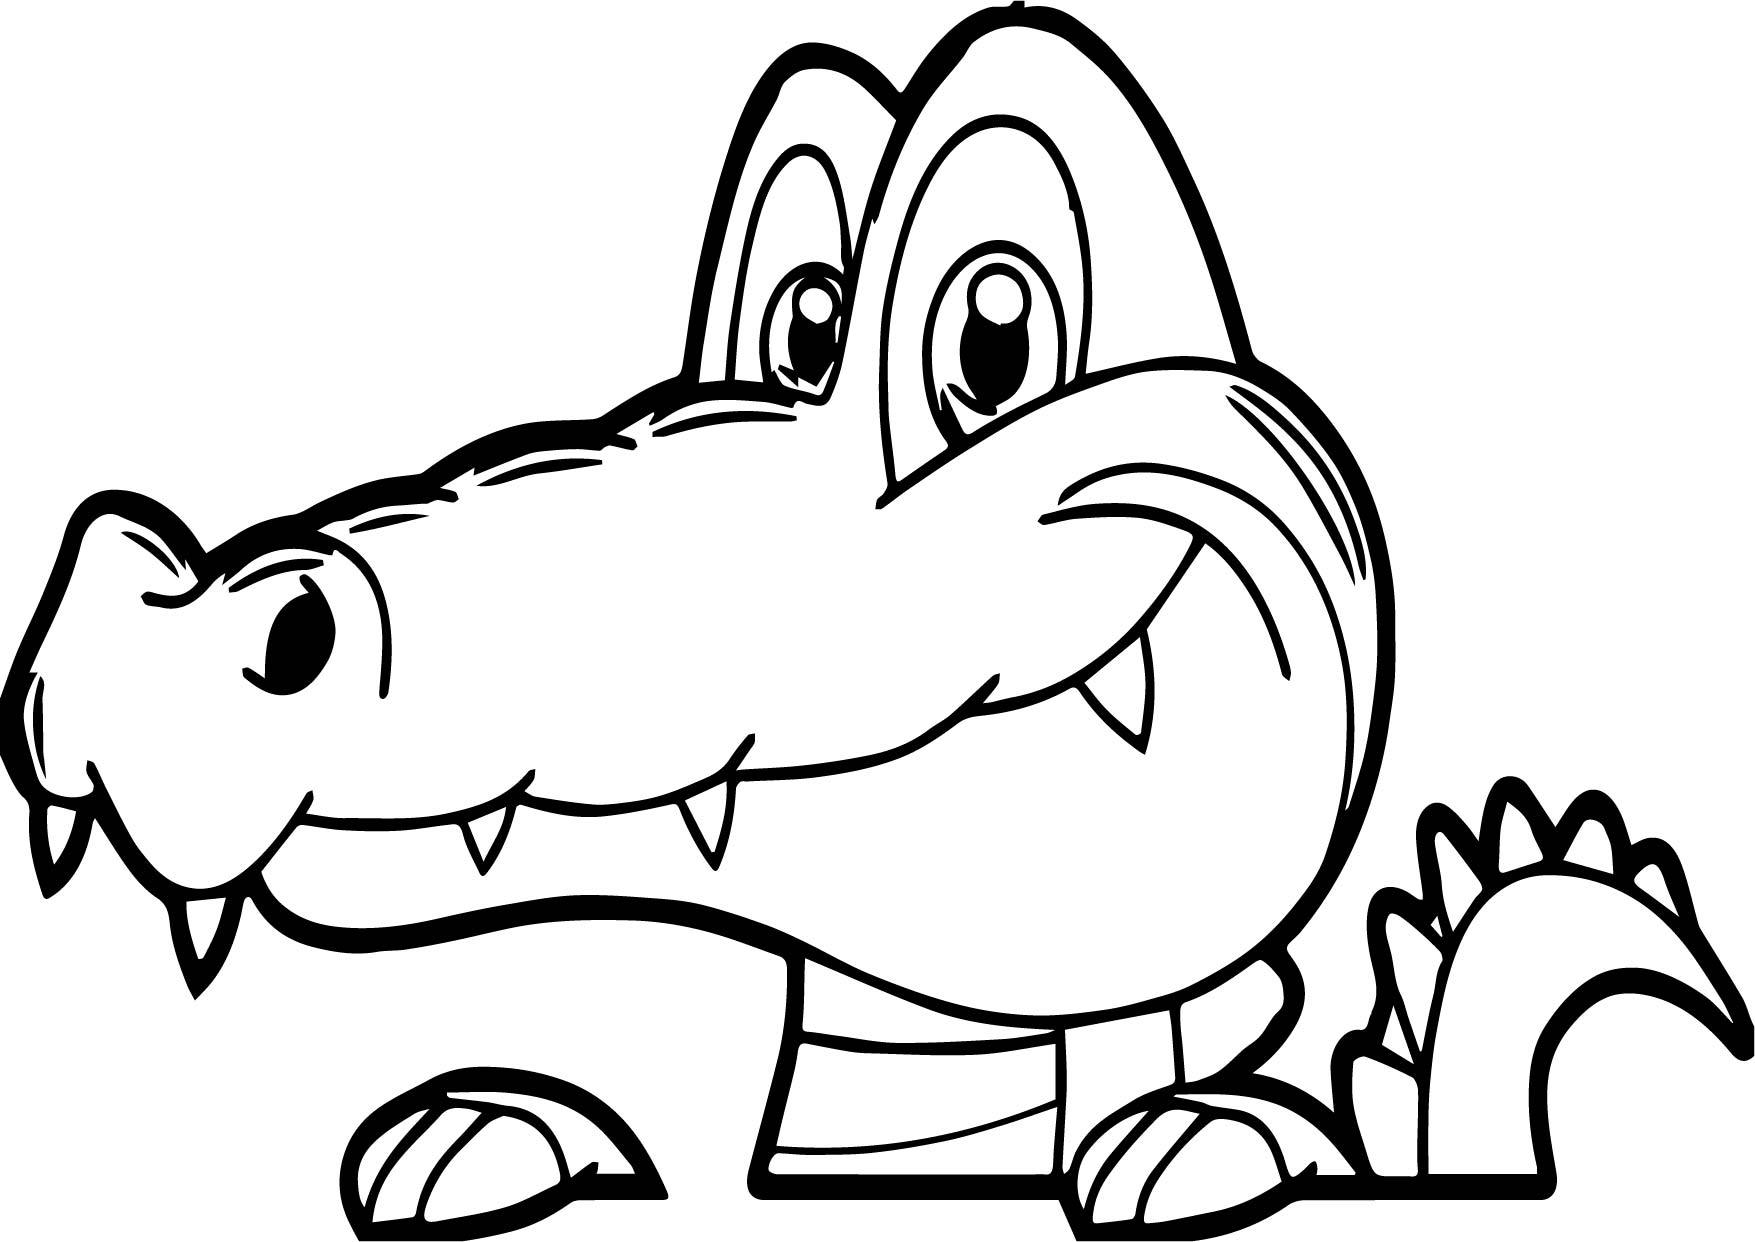 Coloring Page Alligator Wally Gator Coloring Pages Wiring Diagram Database